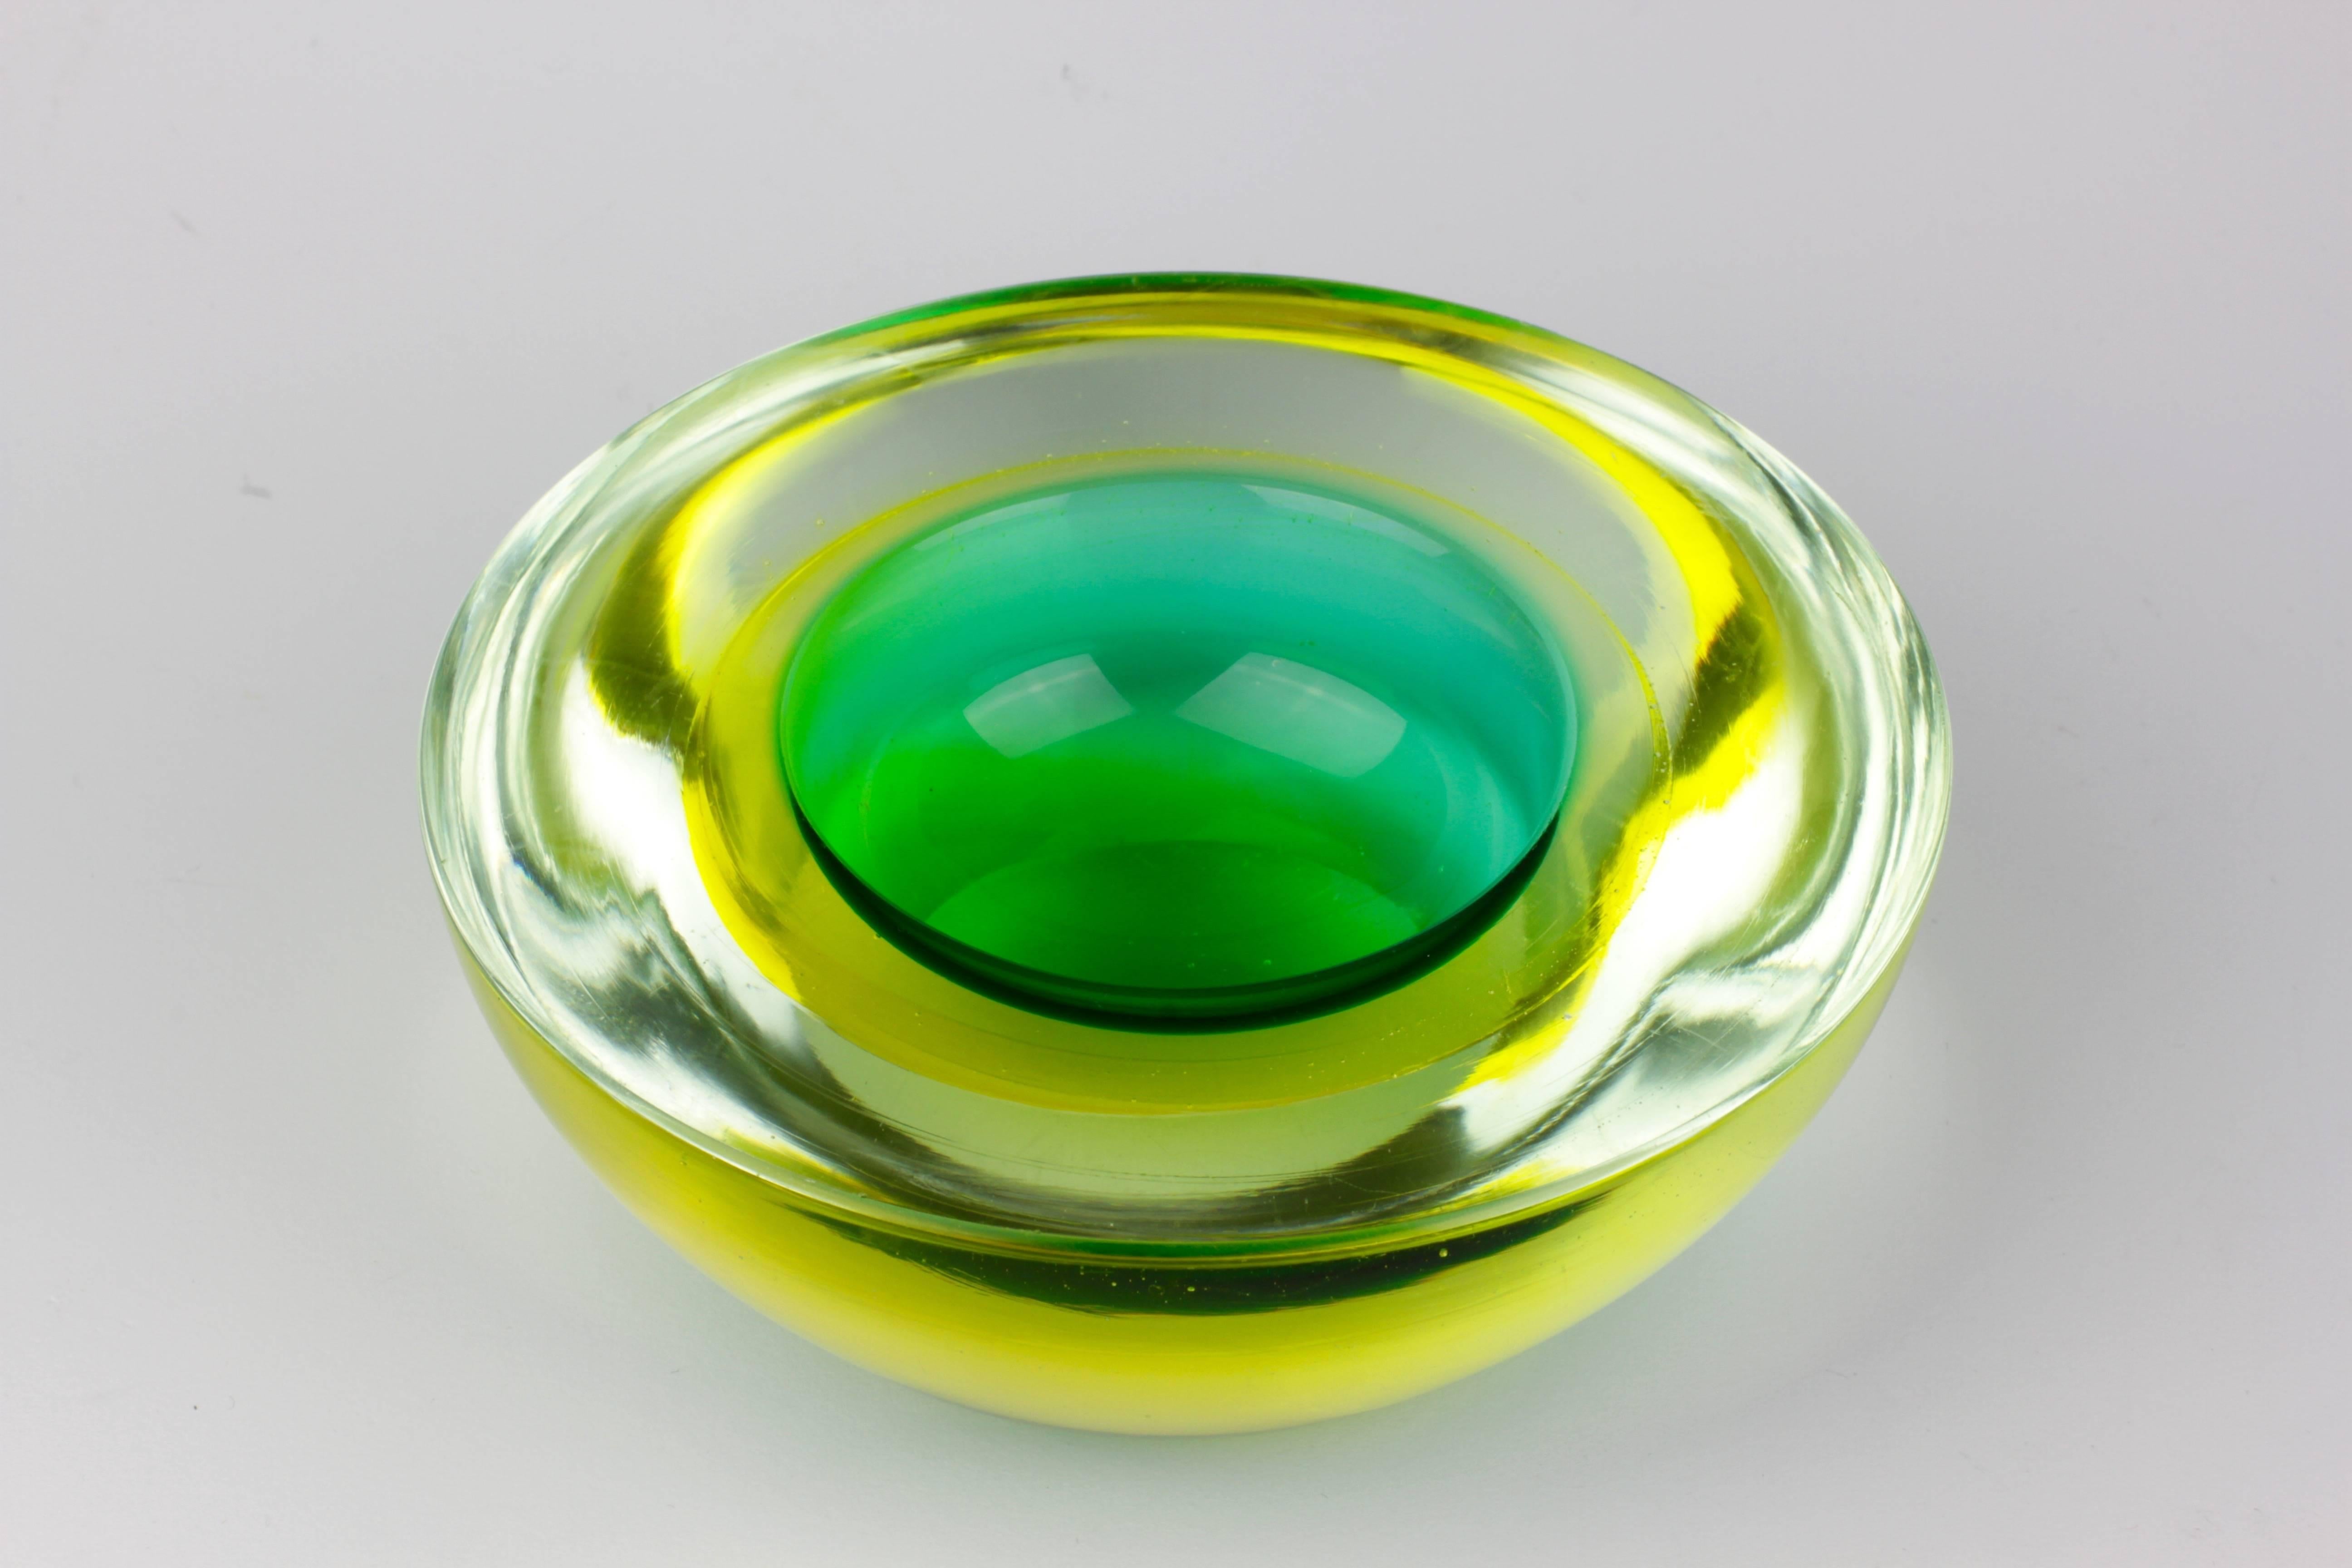 Mid-Century Modern Rare Green and Yellow Murano Sommerso Glass Bowl by Seguso for Vetri d'Arte